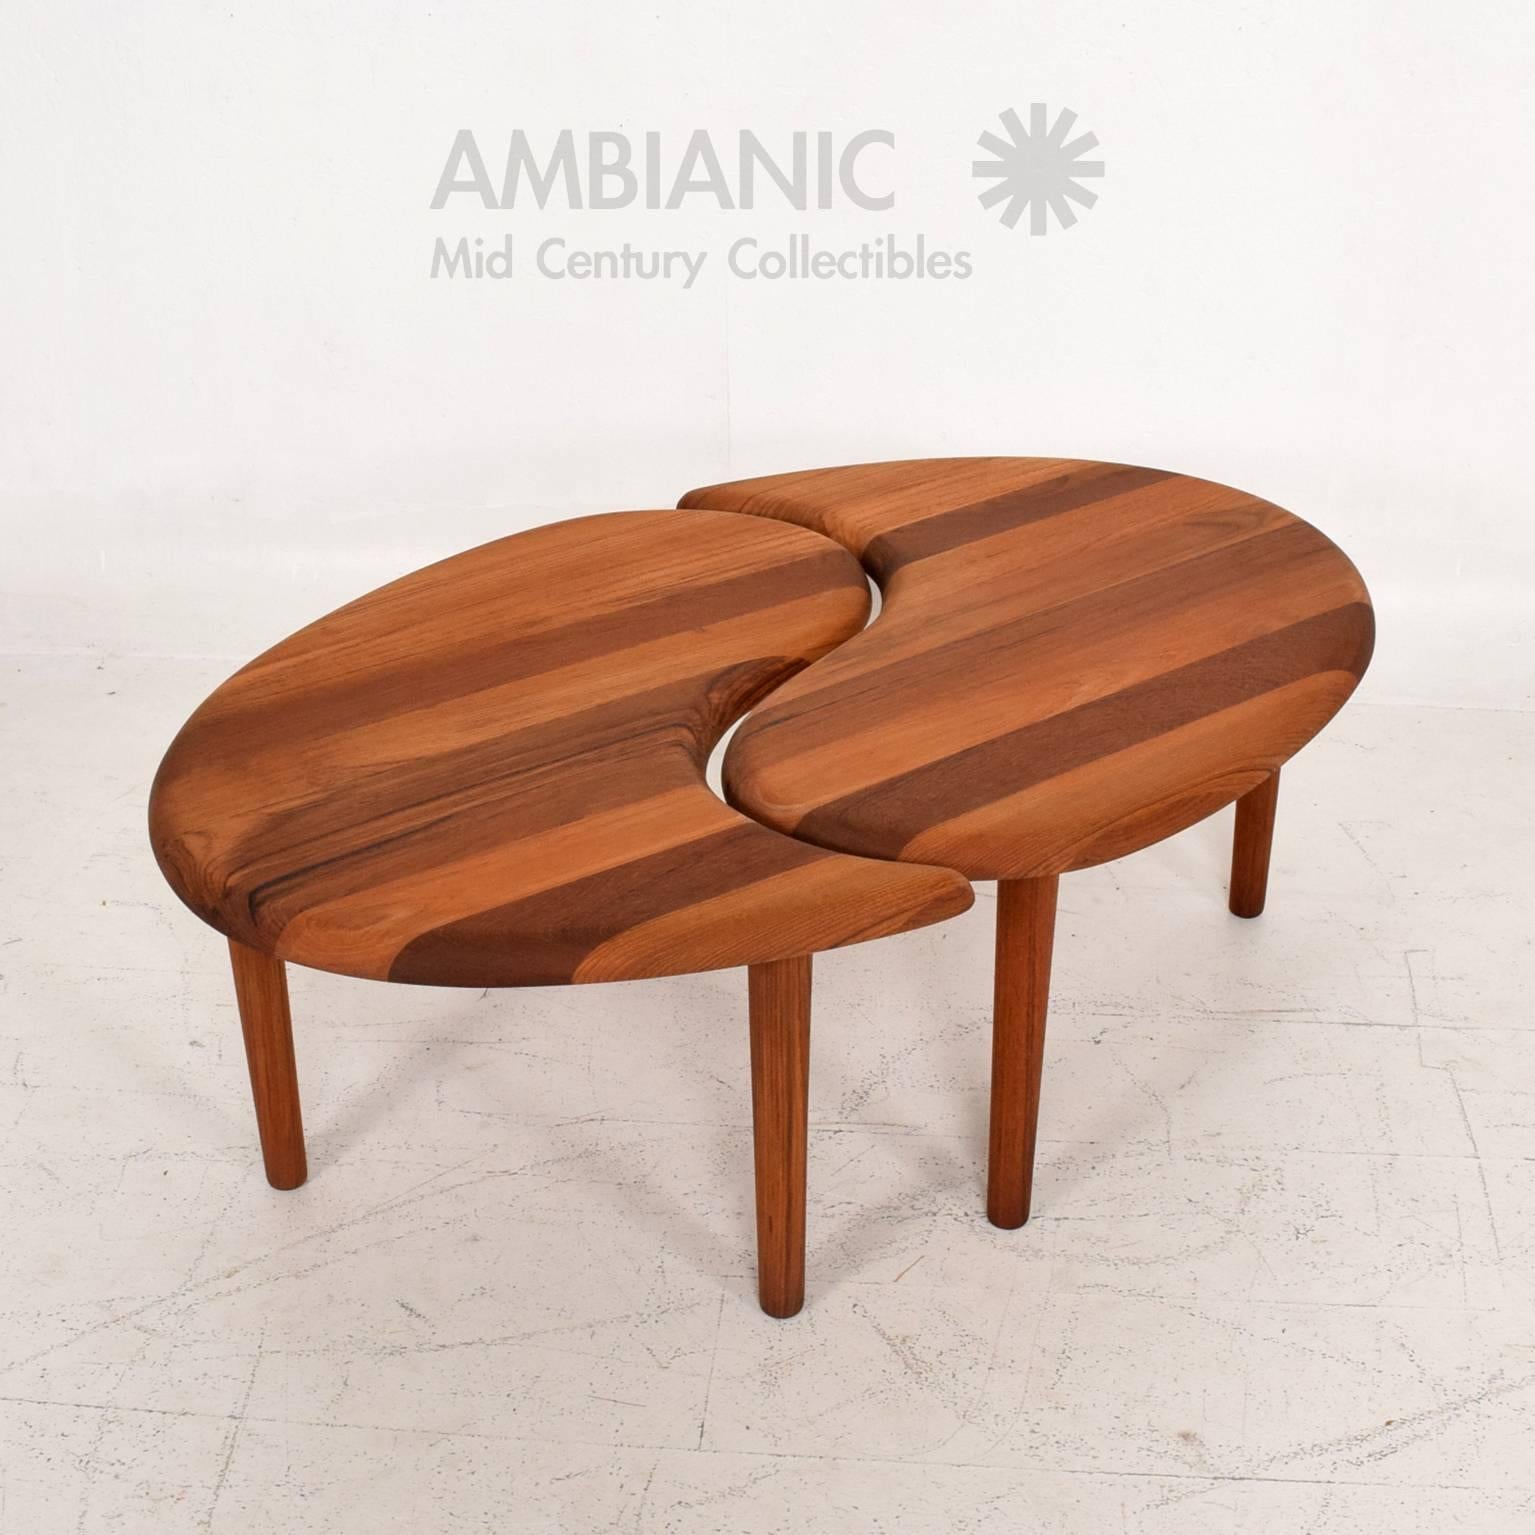 For your consideration a pair of side table or coffee table constructed with solid teak wood. Peg legs can be removed for safe and easy shipping. 

Attributed to Prelude Hi Ace. No label present. 

44